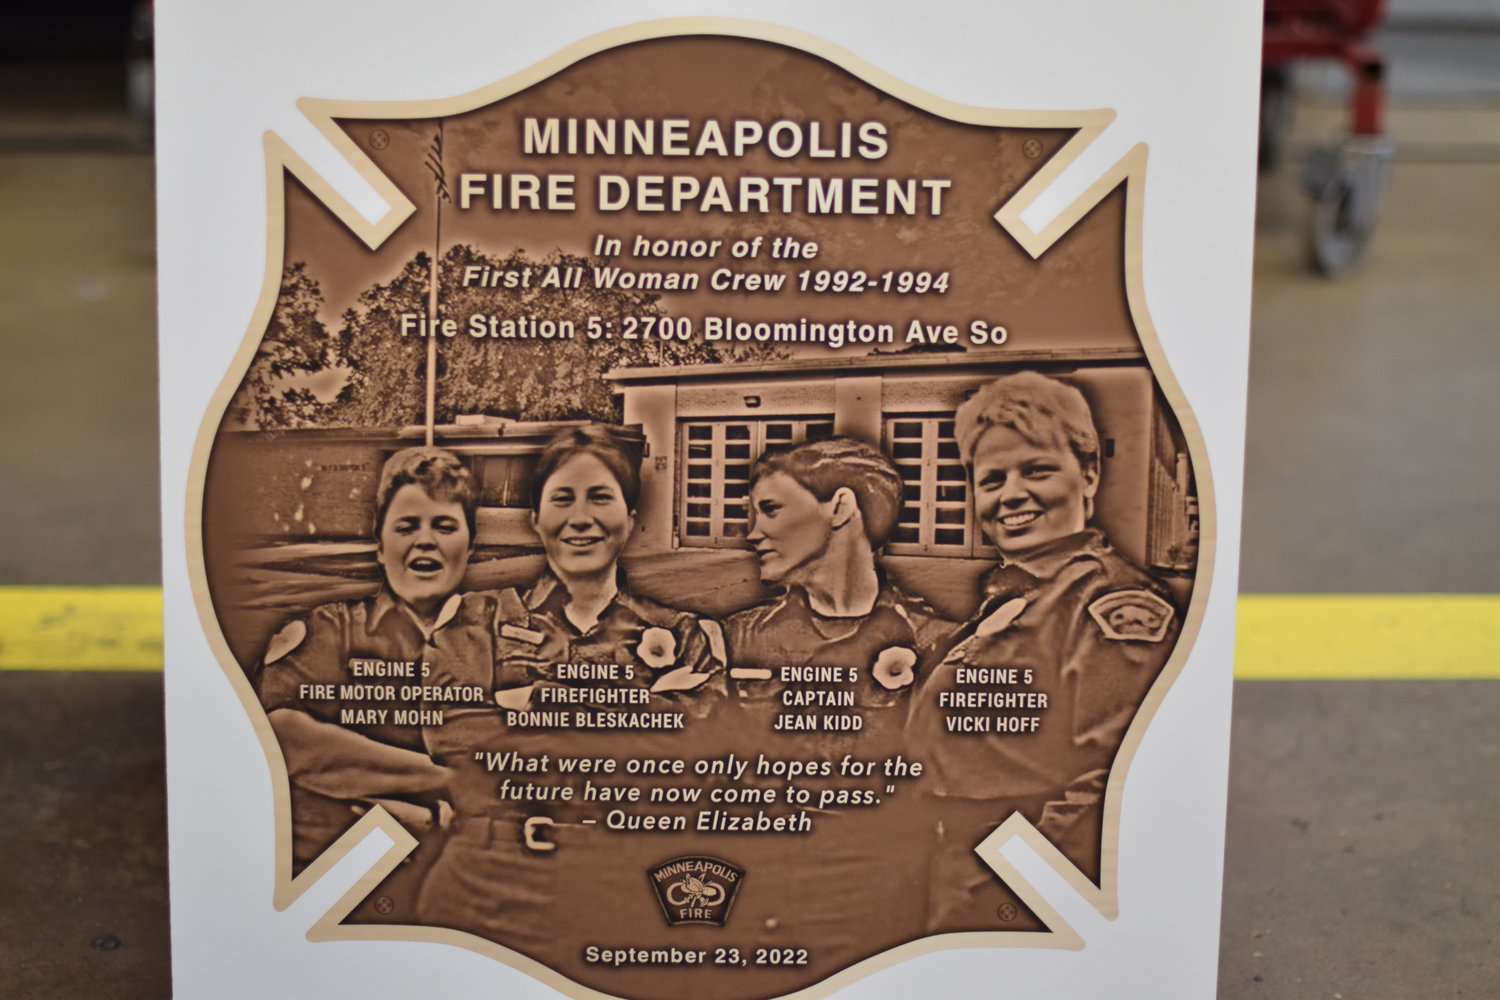 The plaque commemorating the city’s first all-women fire crew who served together from 1992-1994 will be placed outside the entrance of Fire Station 5.